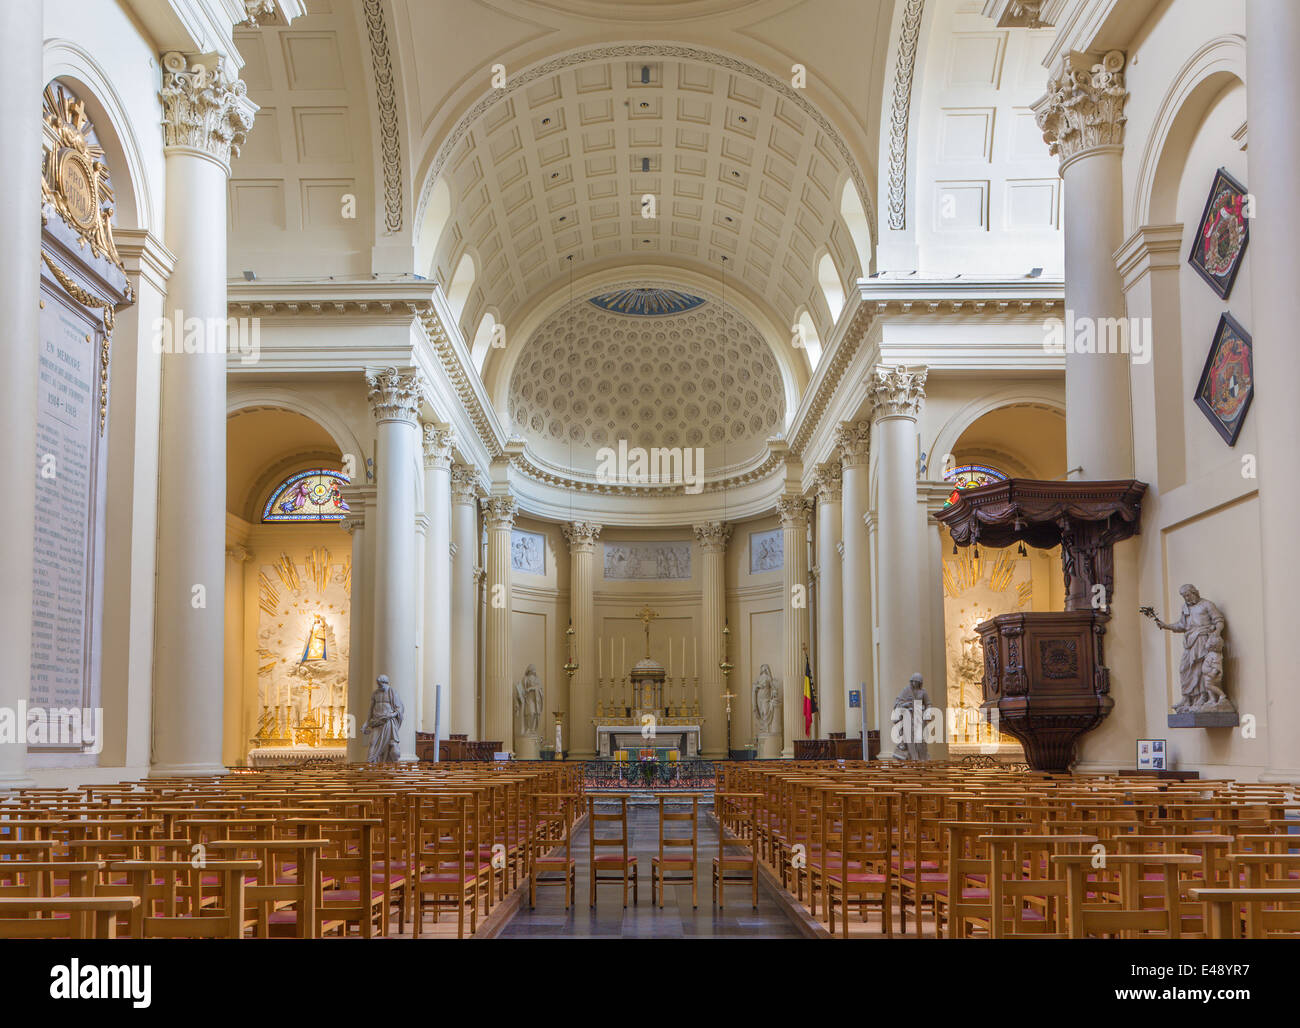 BRUSSELS, BELGIUM - JUNE 15, 2014:The church of St. Jacques at The Coudenberg. Stock Photo